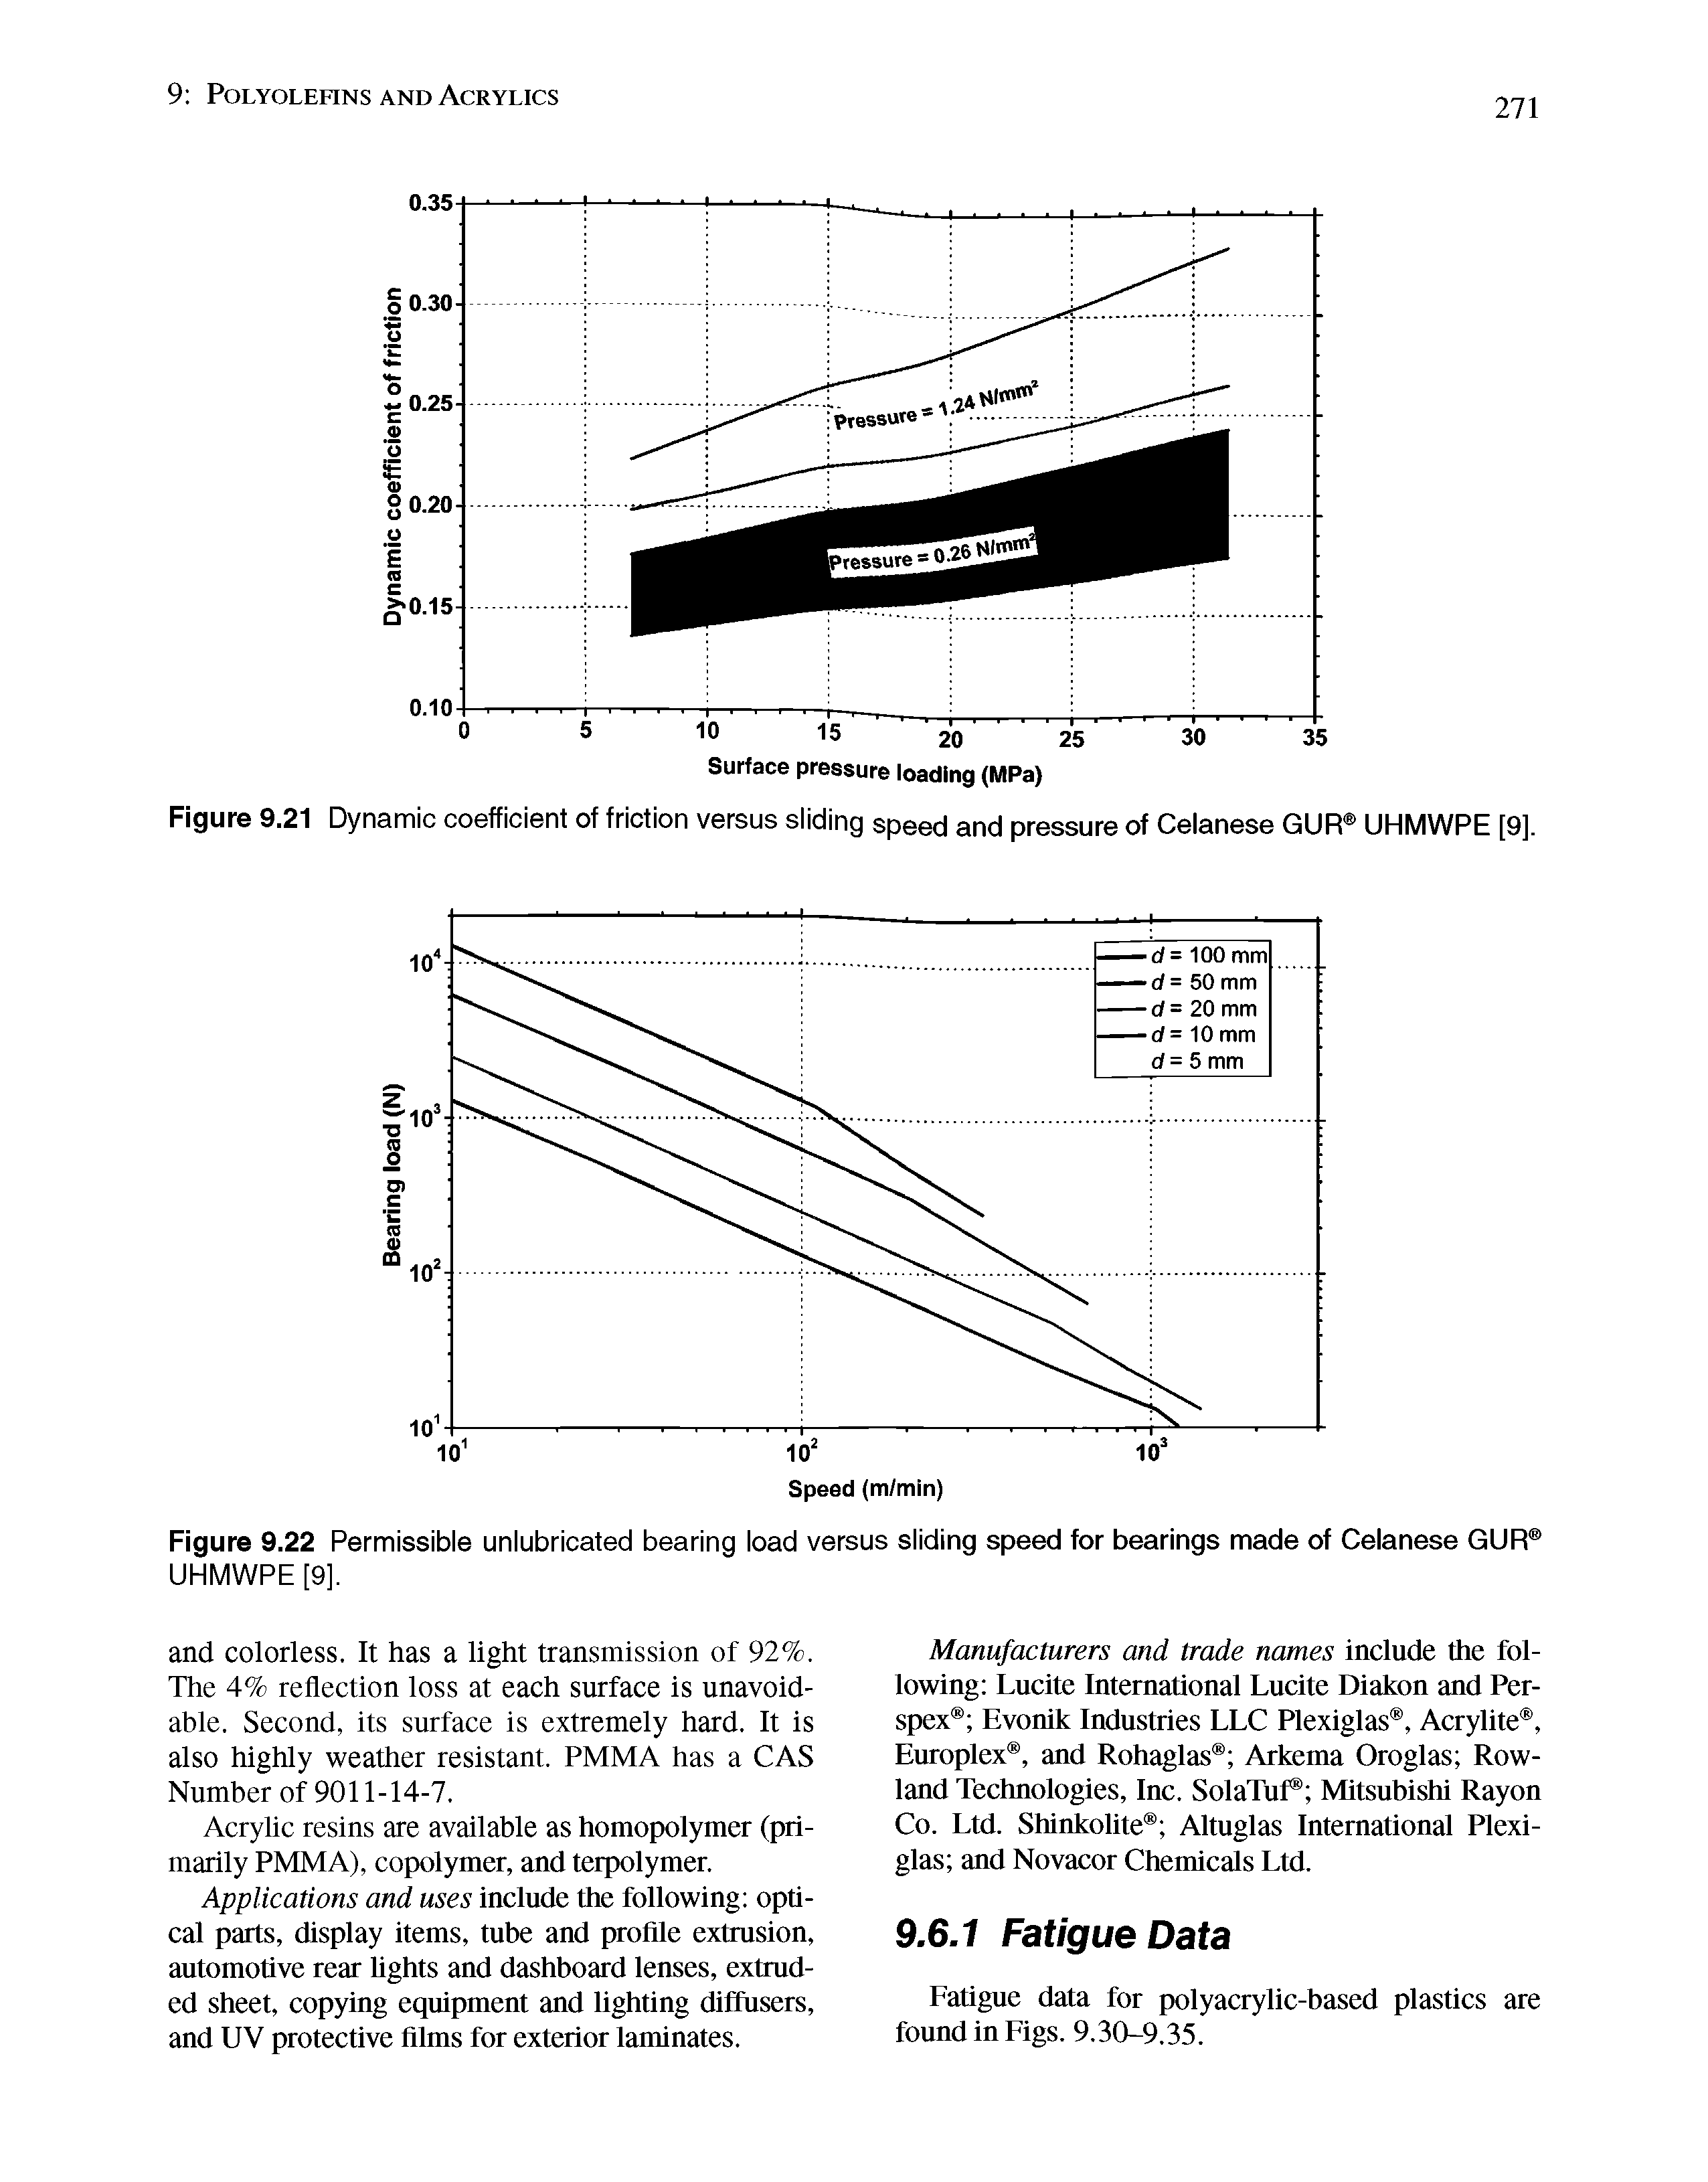 Figure 9.21 Dynamic coefficient of friction versus sliding speed and pressure of Celanese GUR UHMWPE [9].